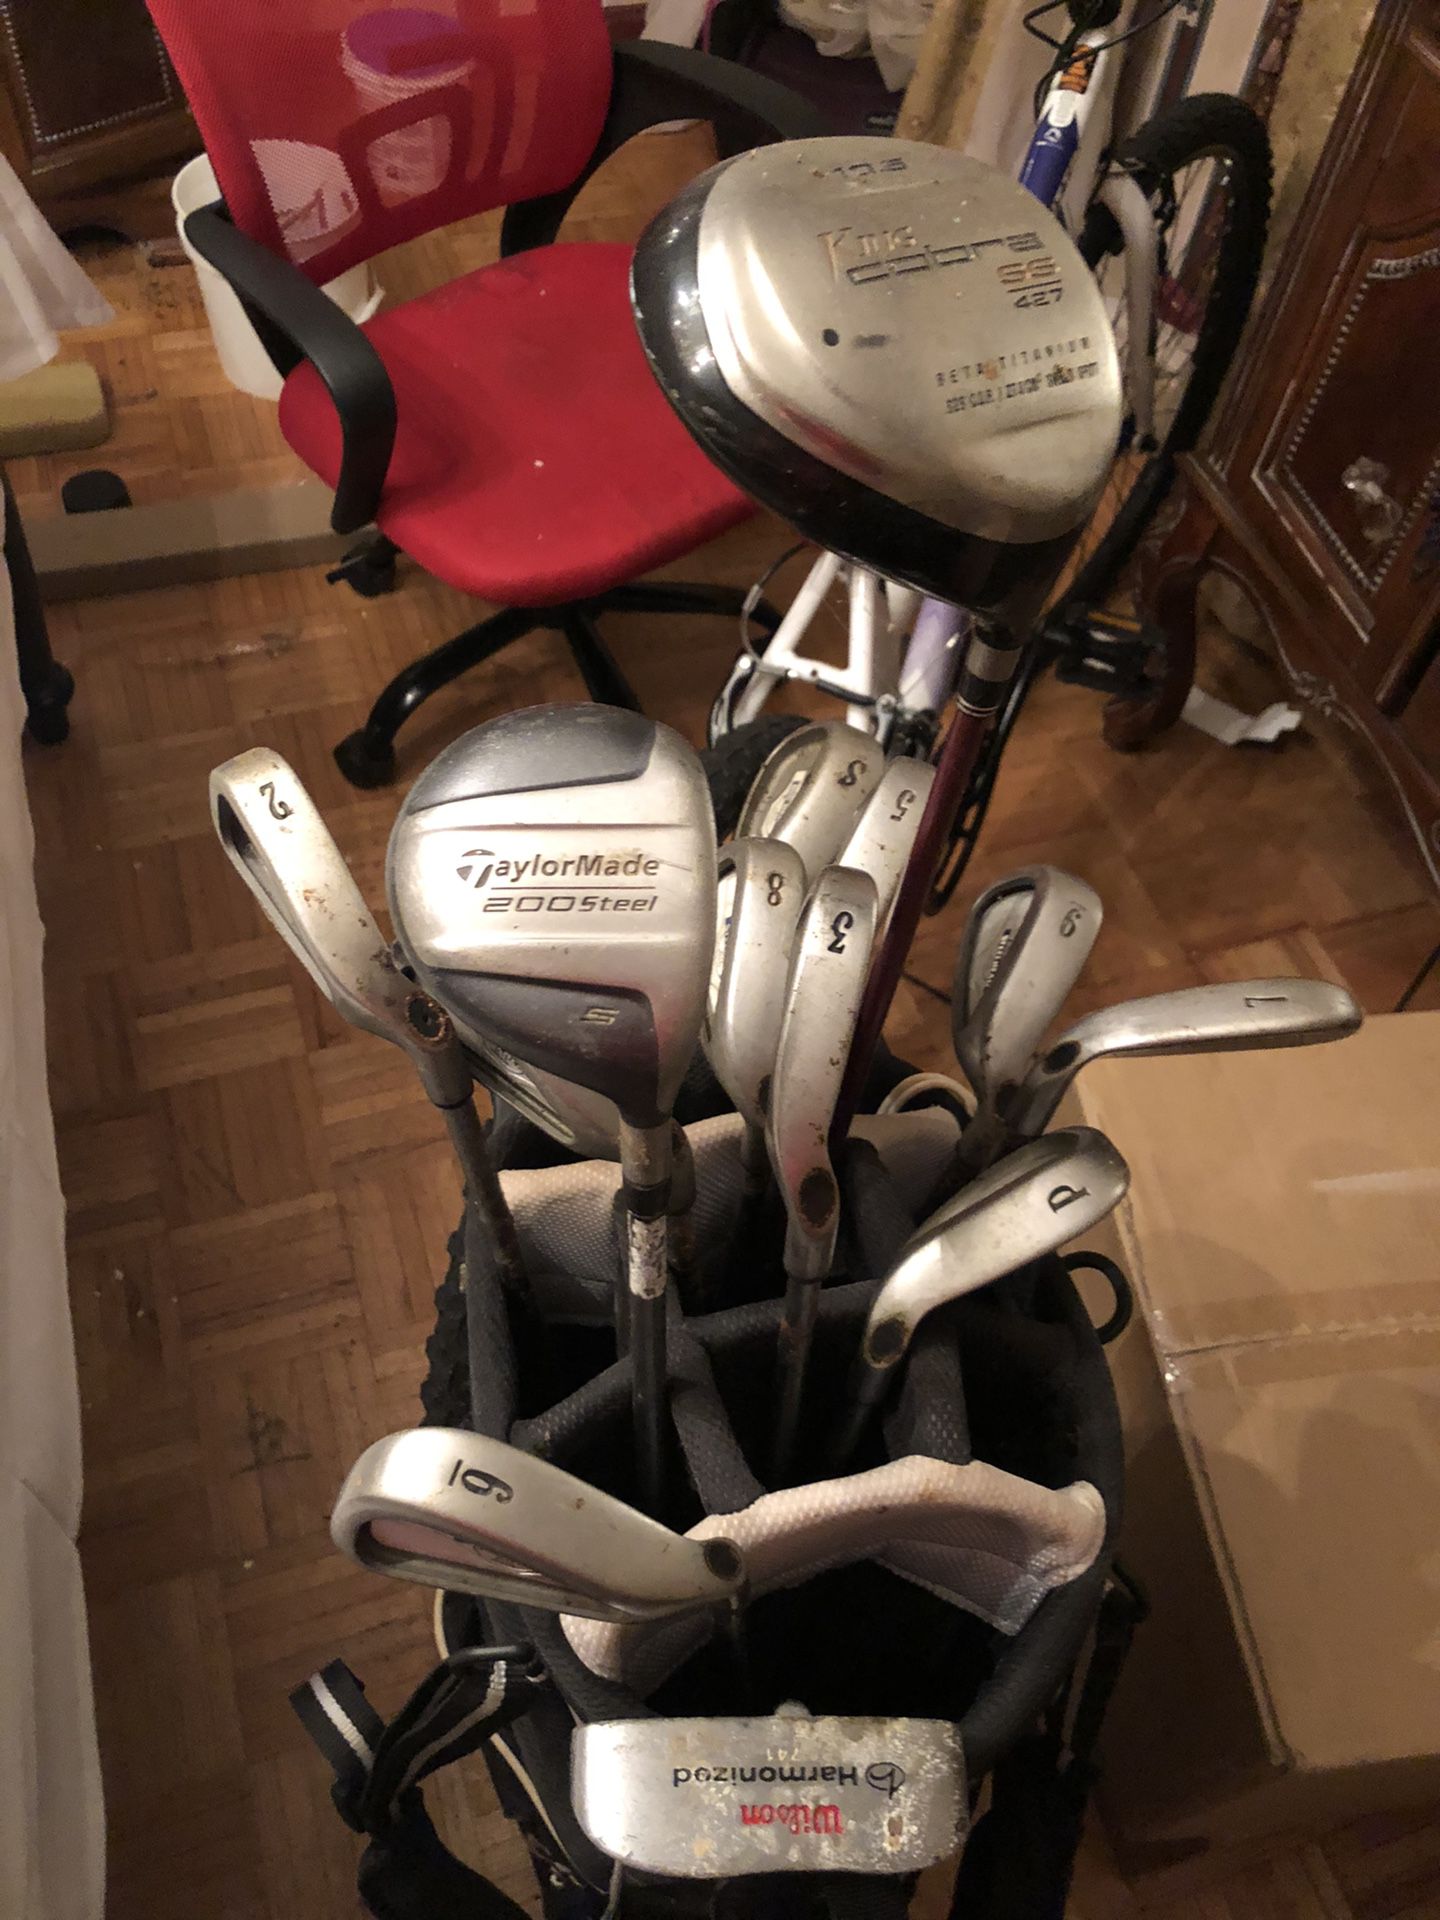 Nike golf bag with 13 clubs